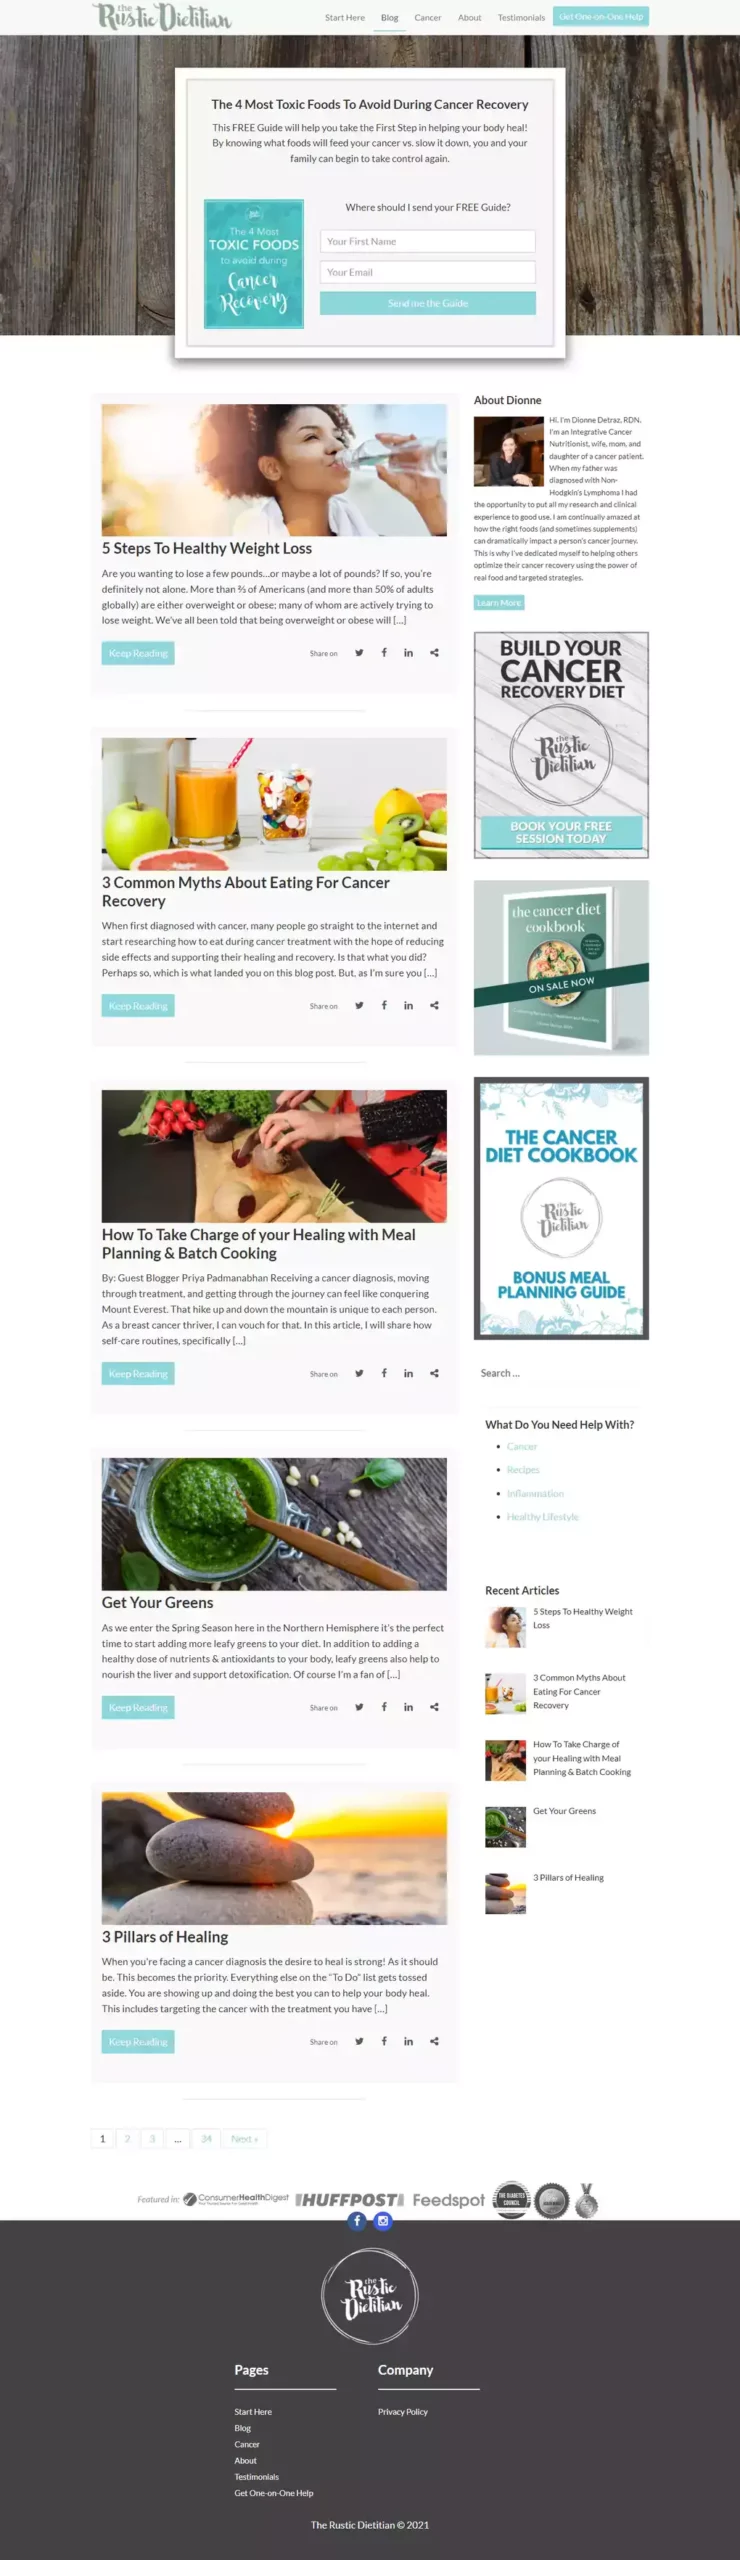 The Rustic Dietitian website scaled 1